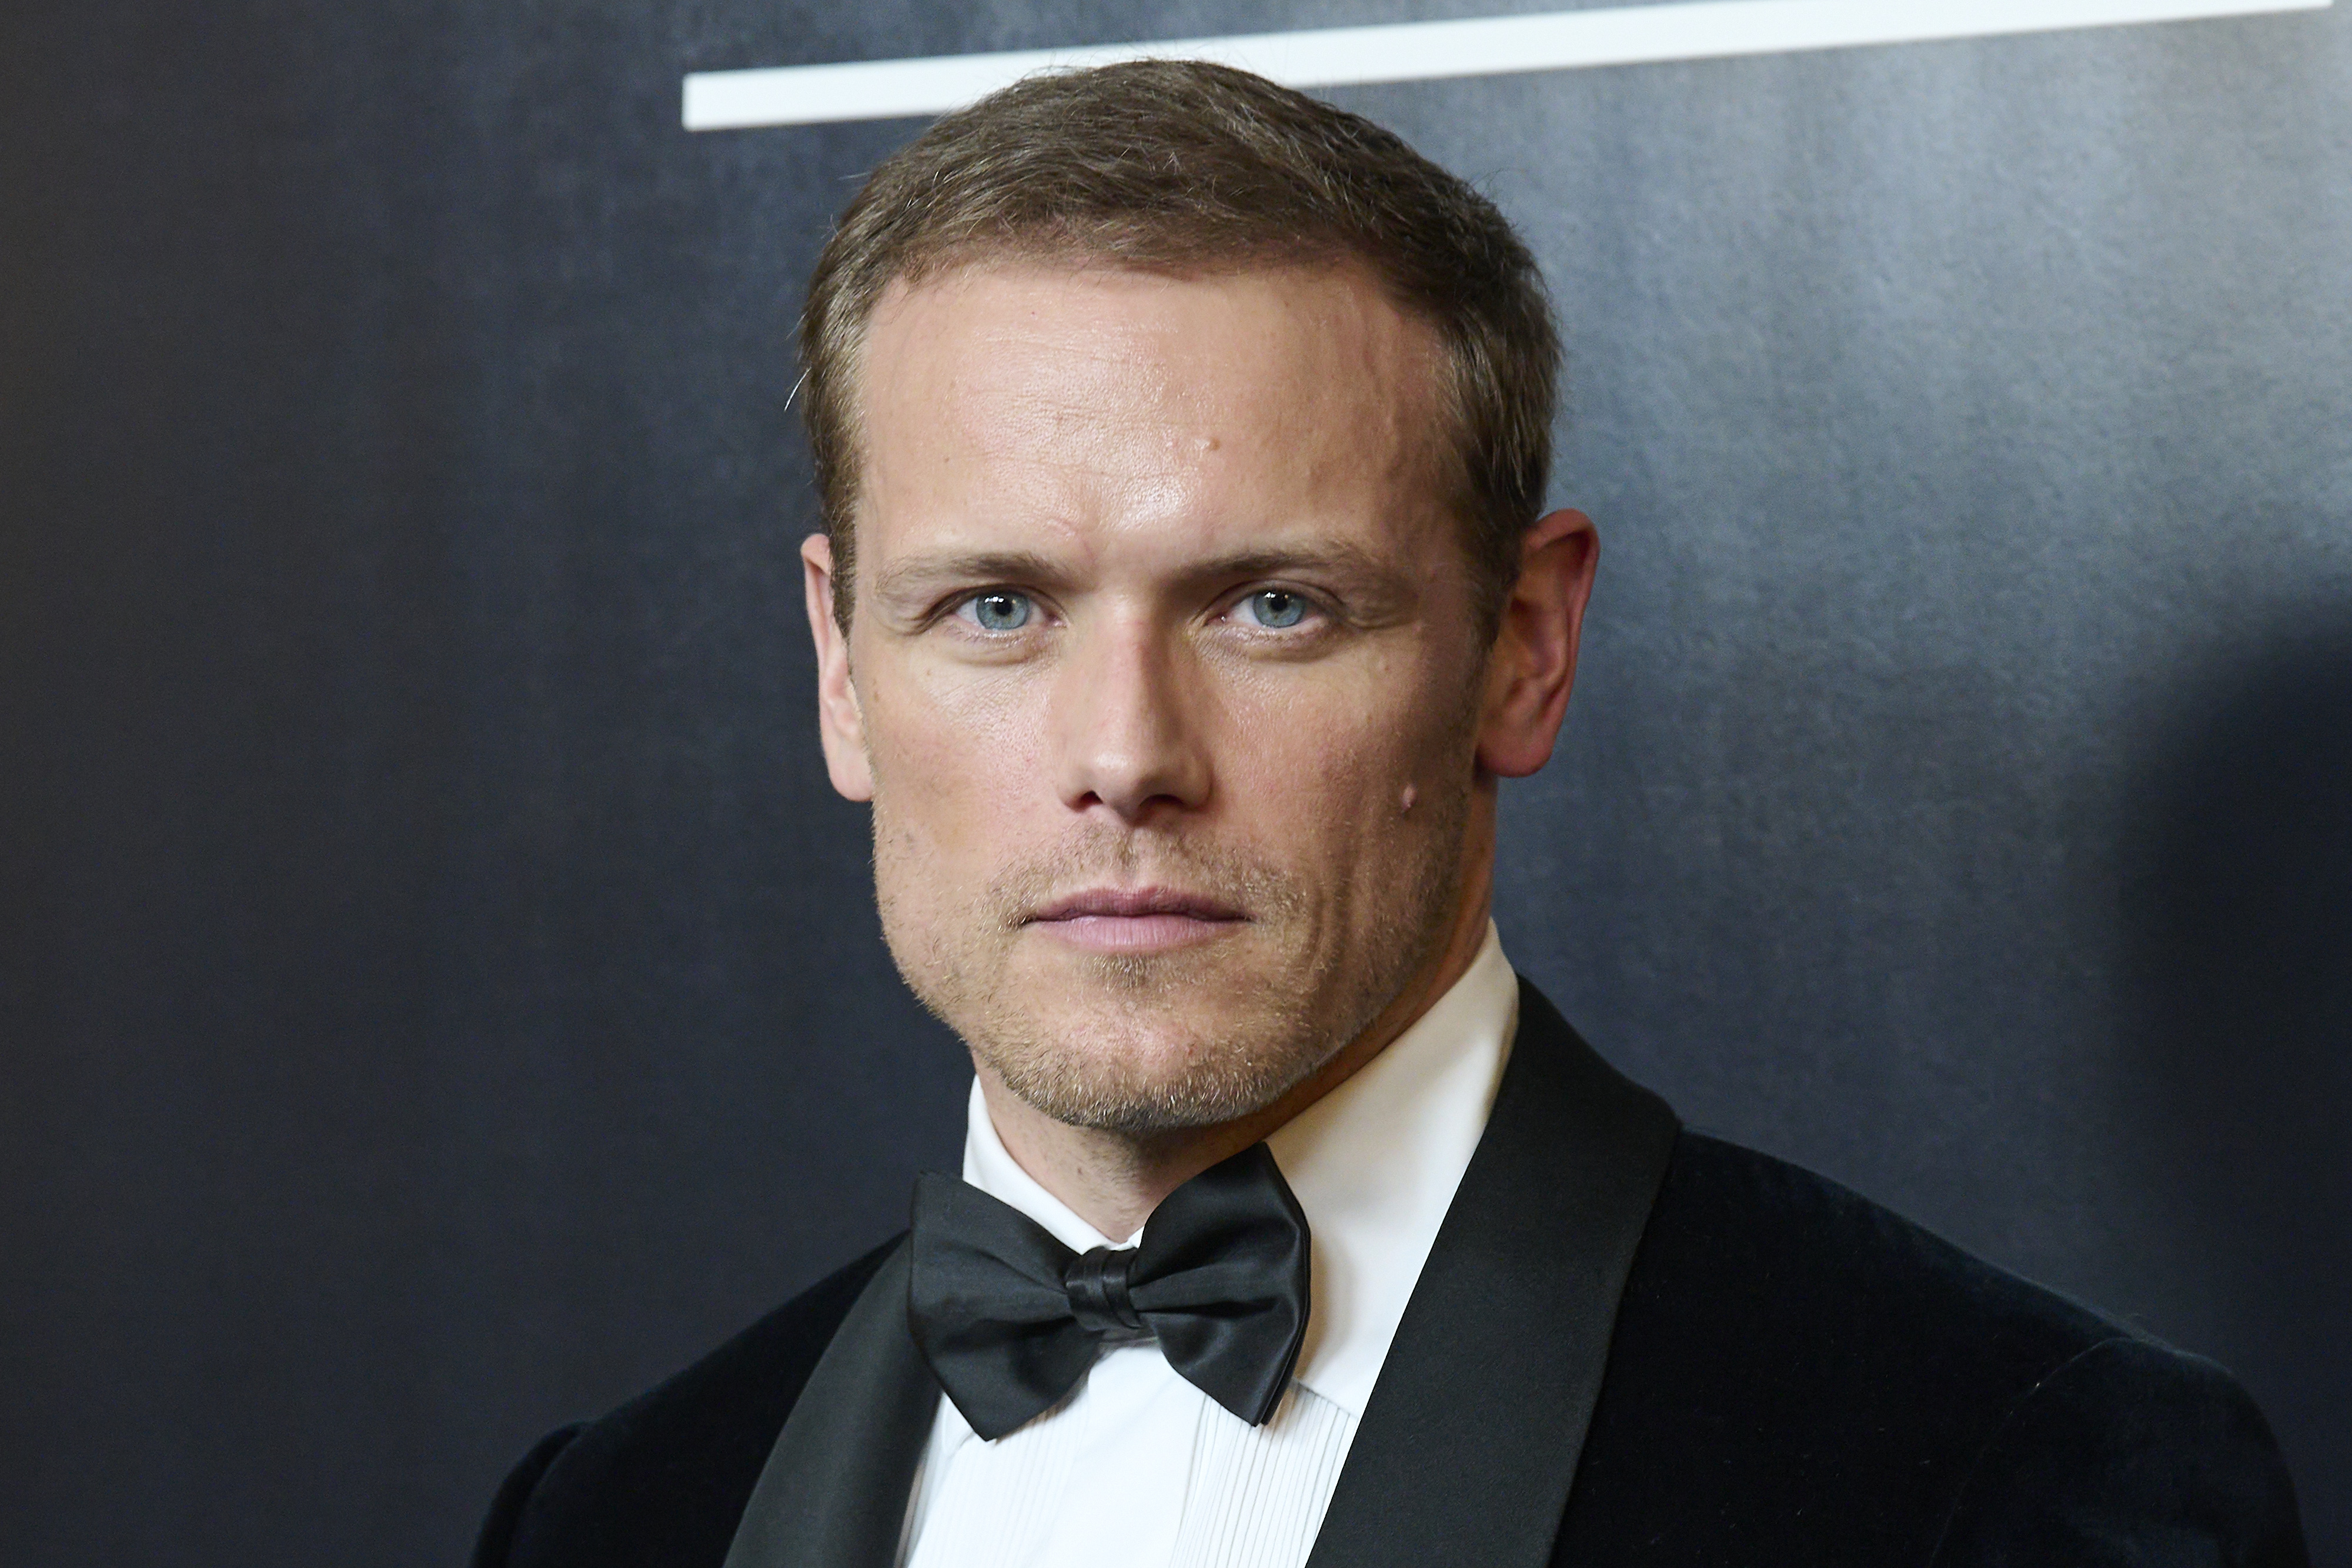 Sam Heughan attends the Esquire "Men Of The Year" awards 2022 at the Casino de Madrid on December 14, 2022, in Madrid, Spain. | Source: Getty Images